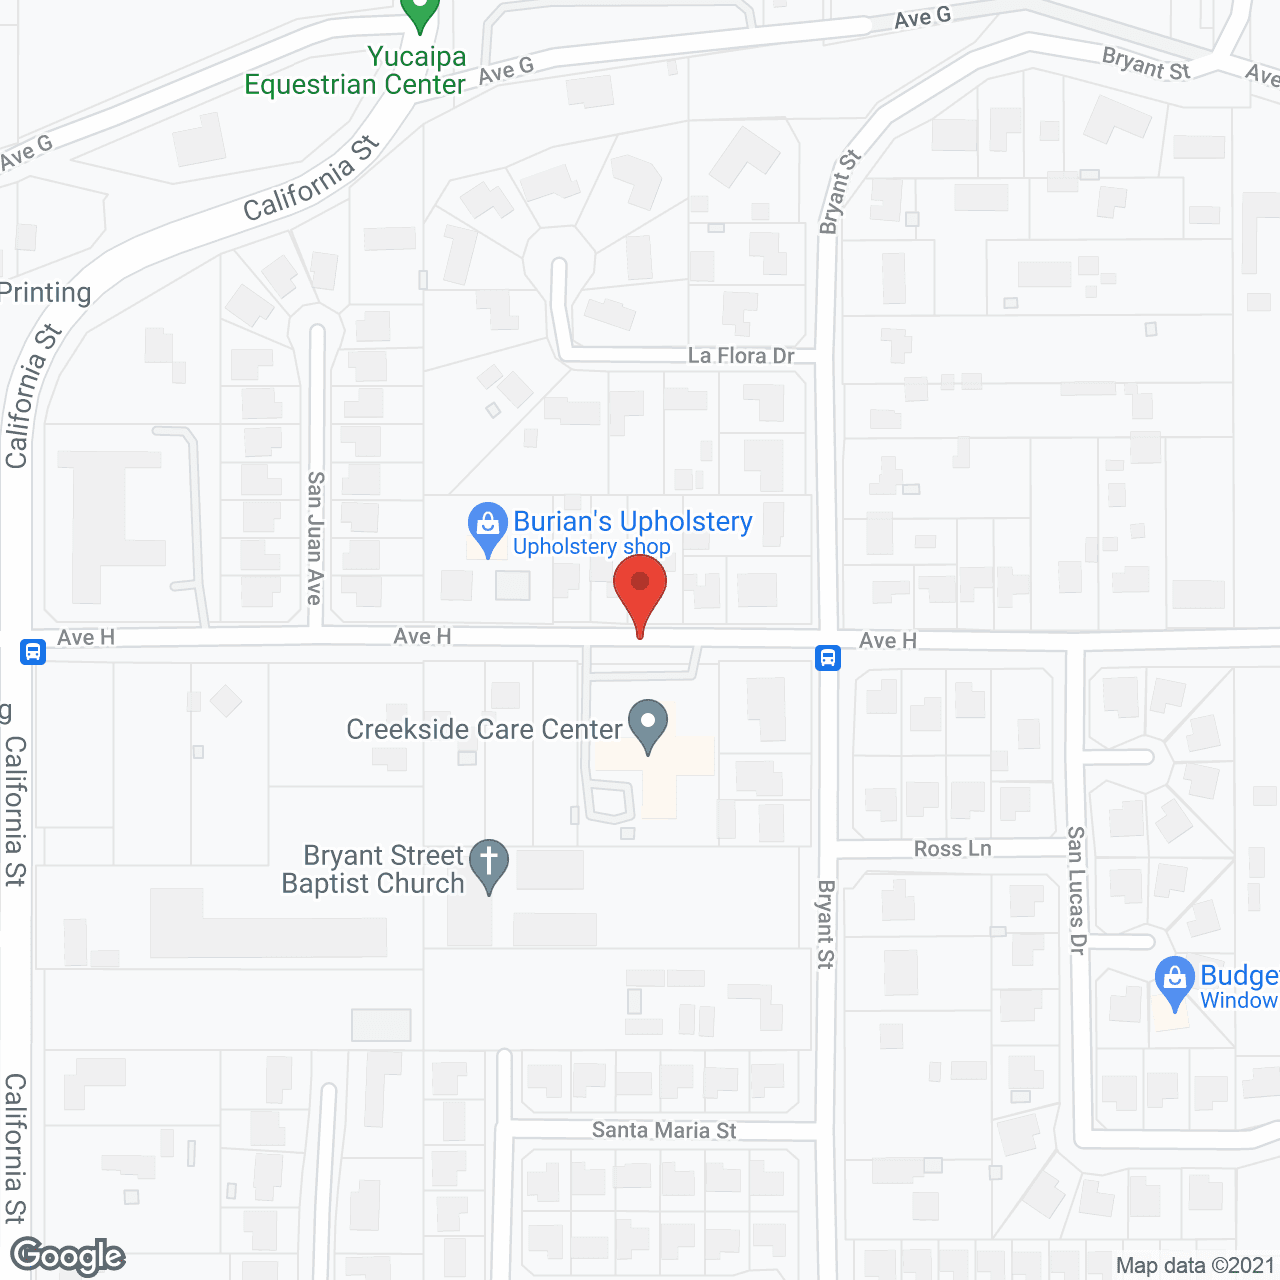 Creekside Care Center in google map